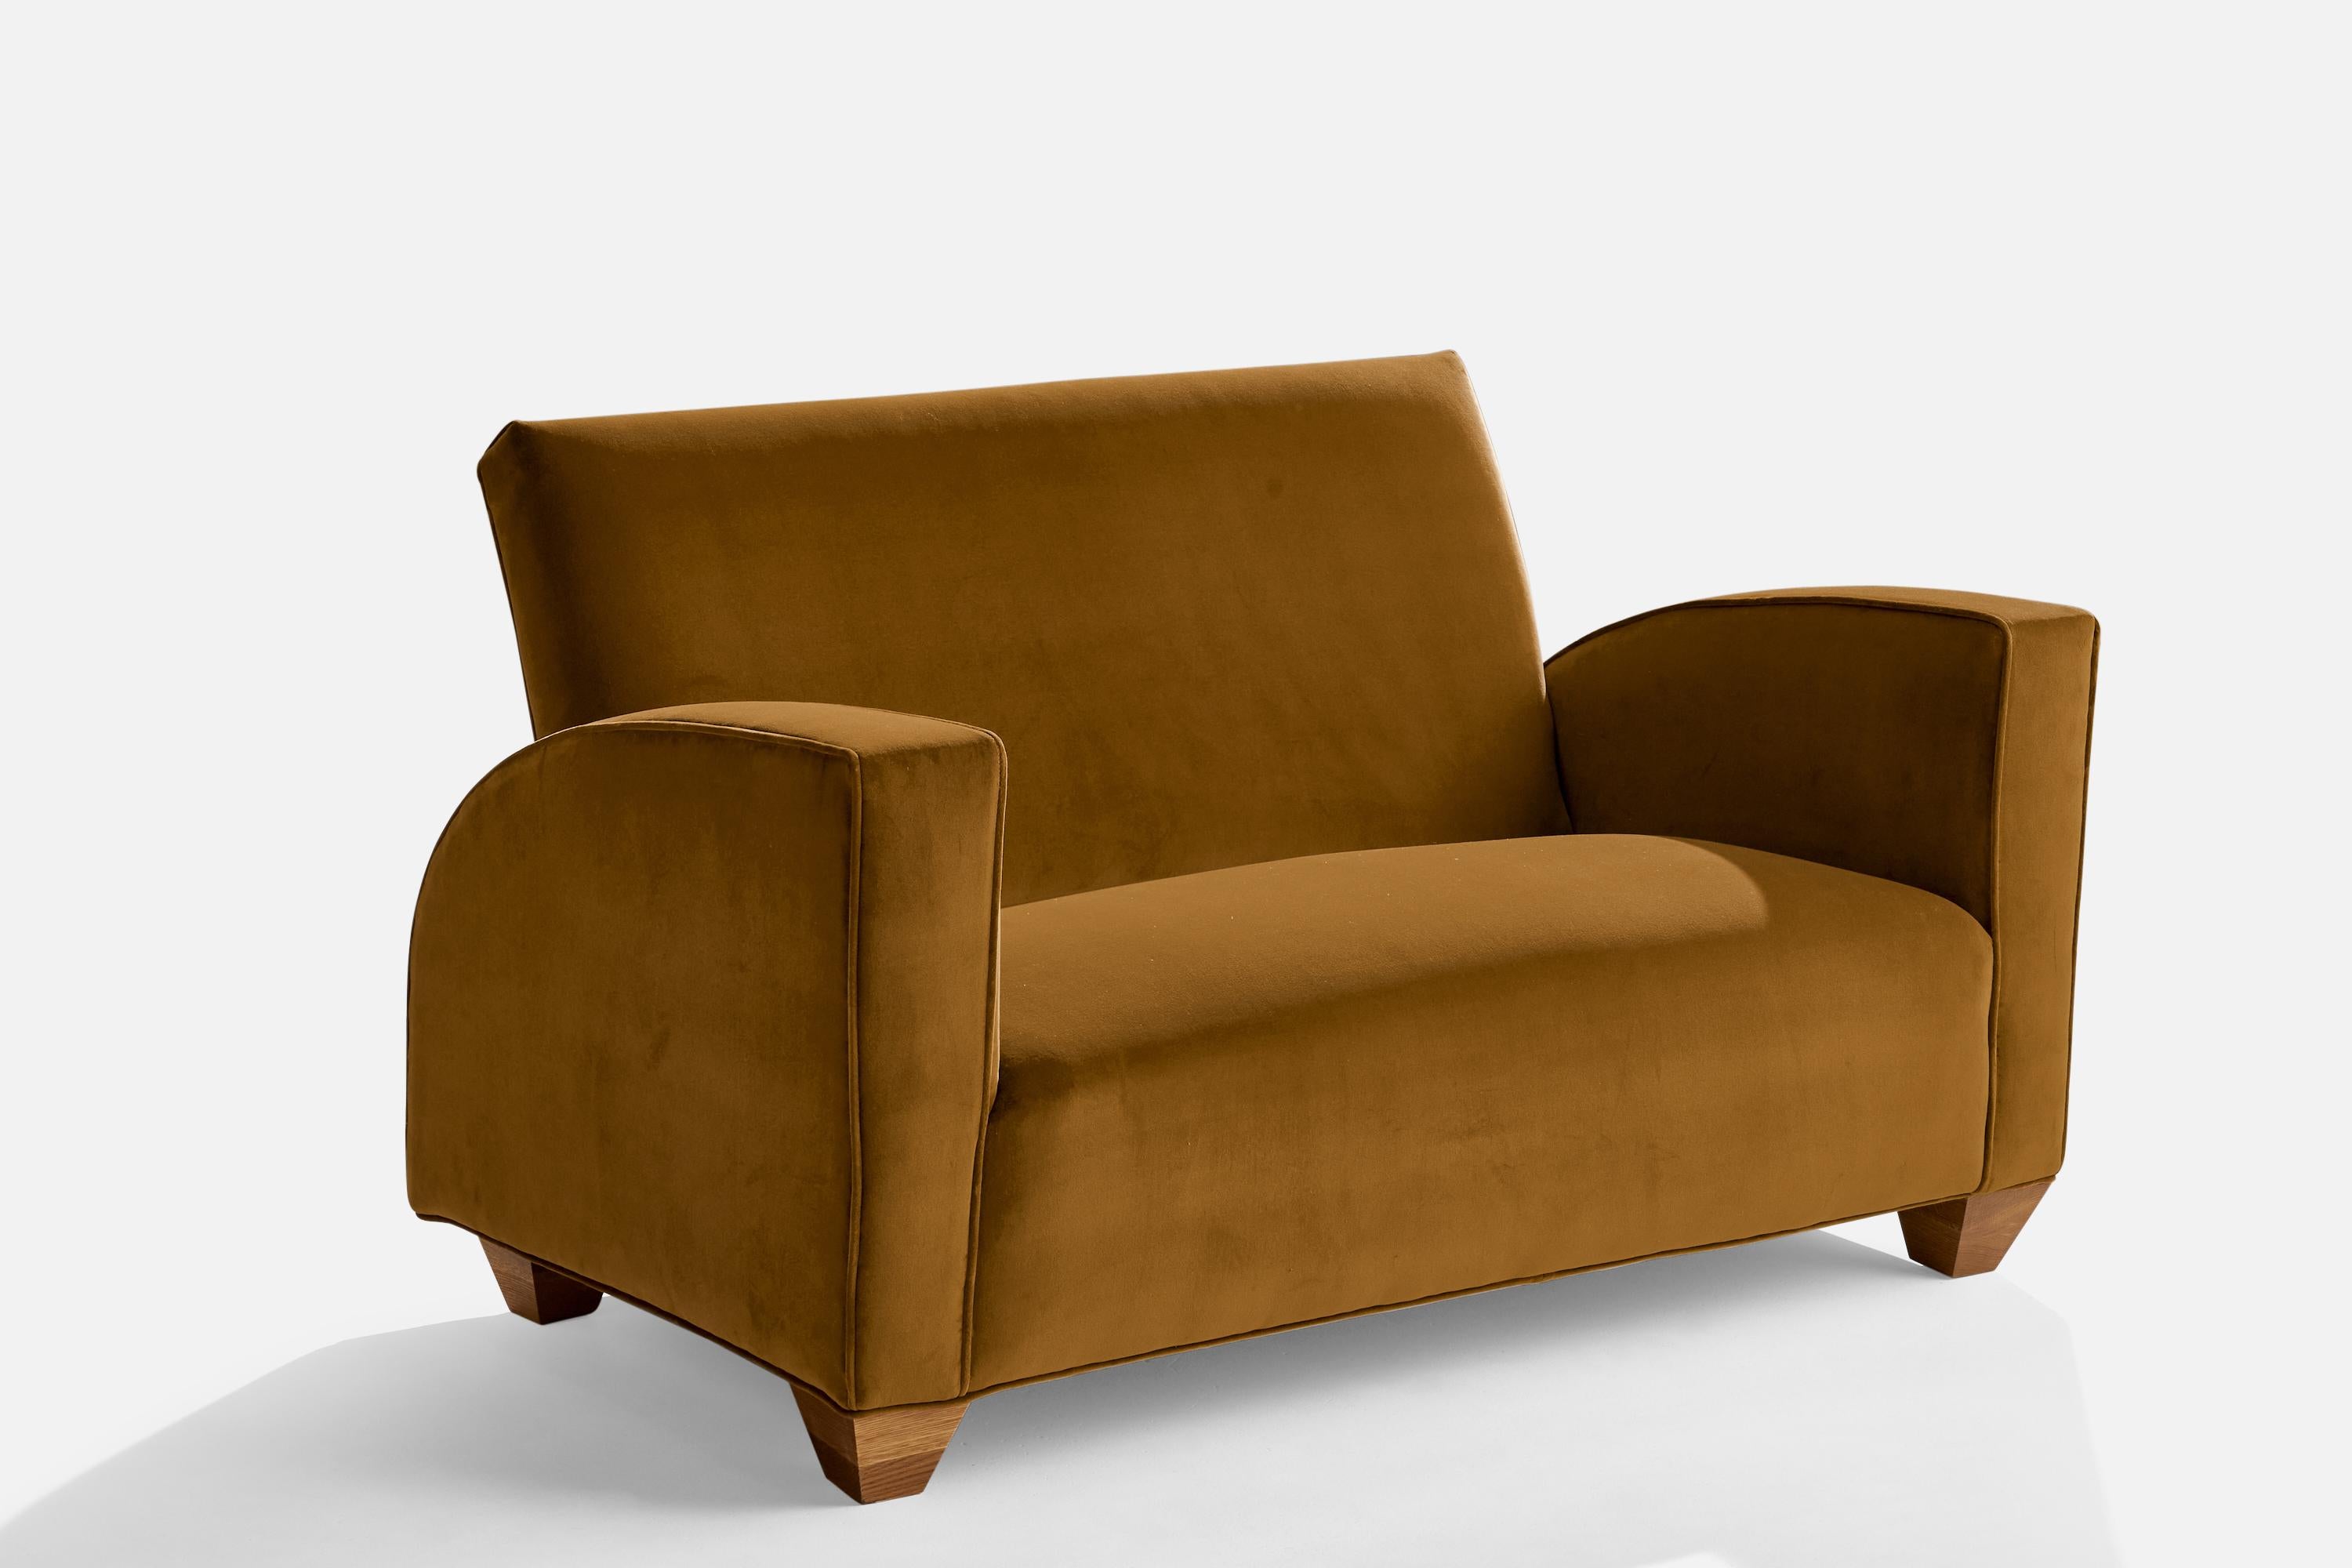 A small two-seat elm and beige brown velvet sofa designed and produced in Sweden, 1930s.

Seat height 17”